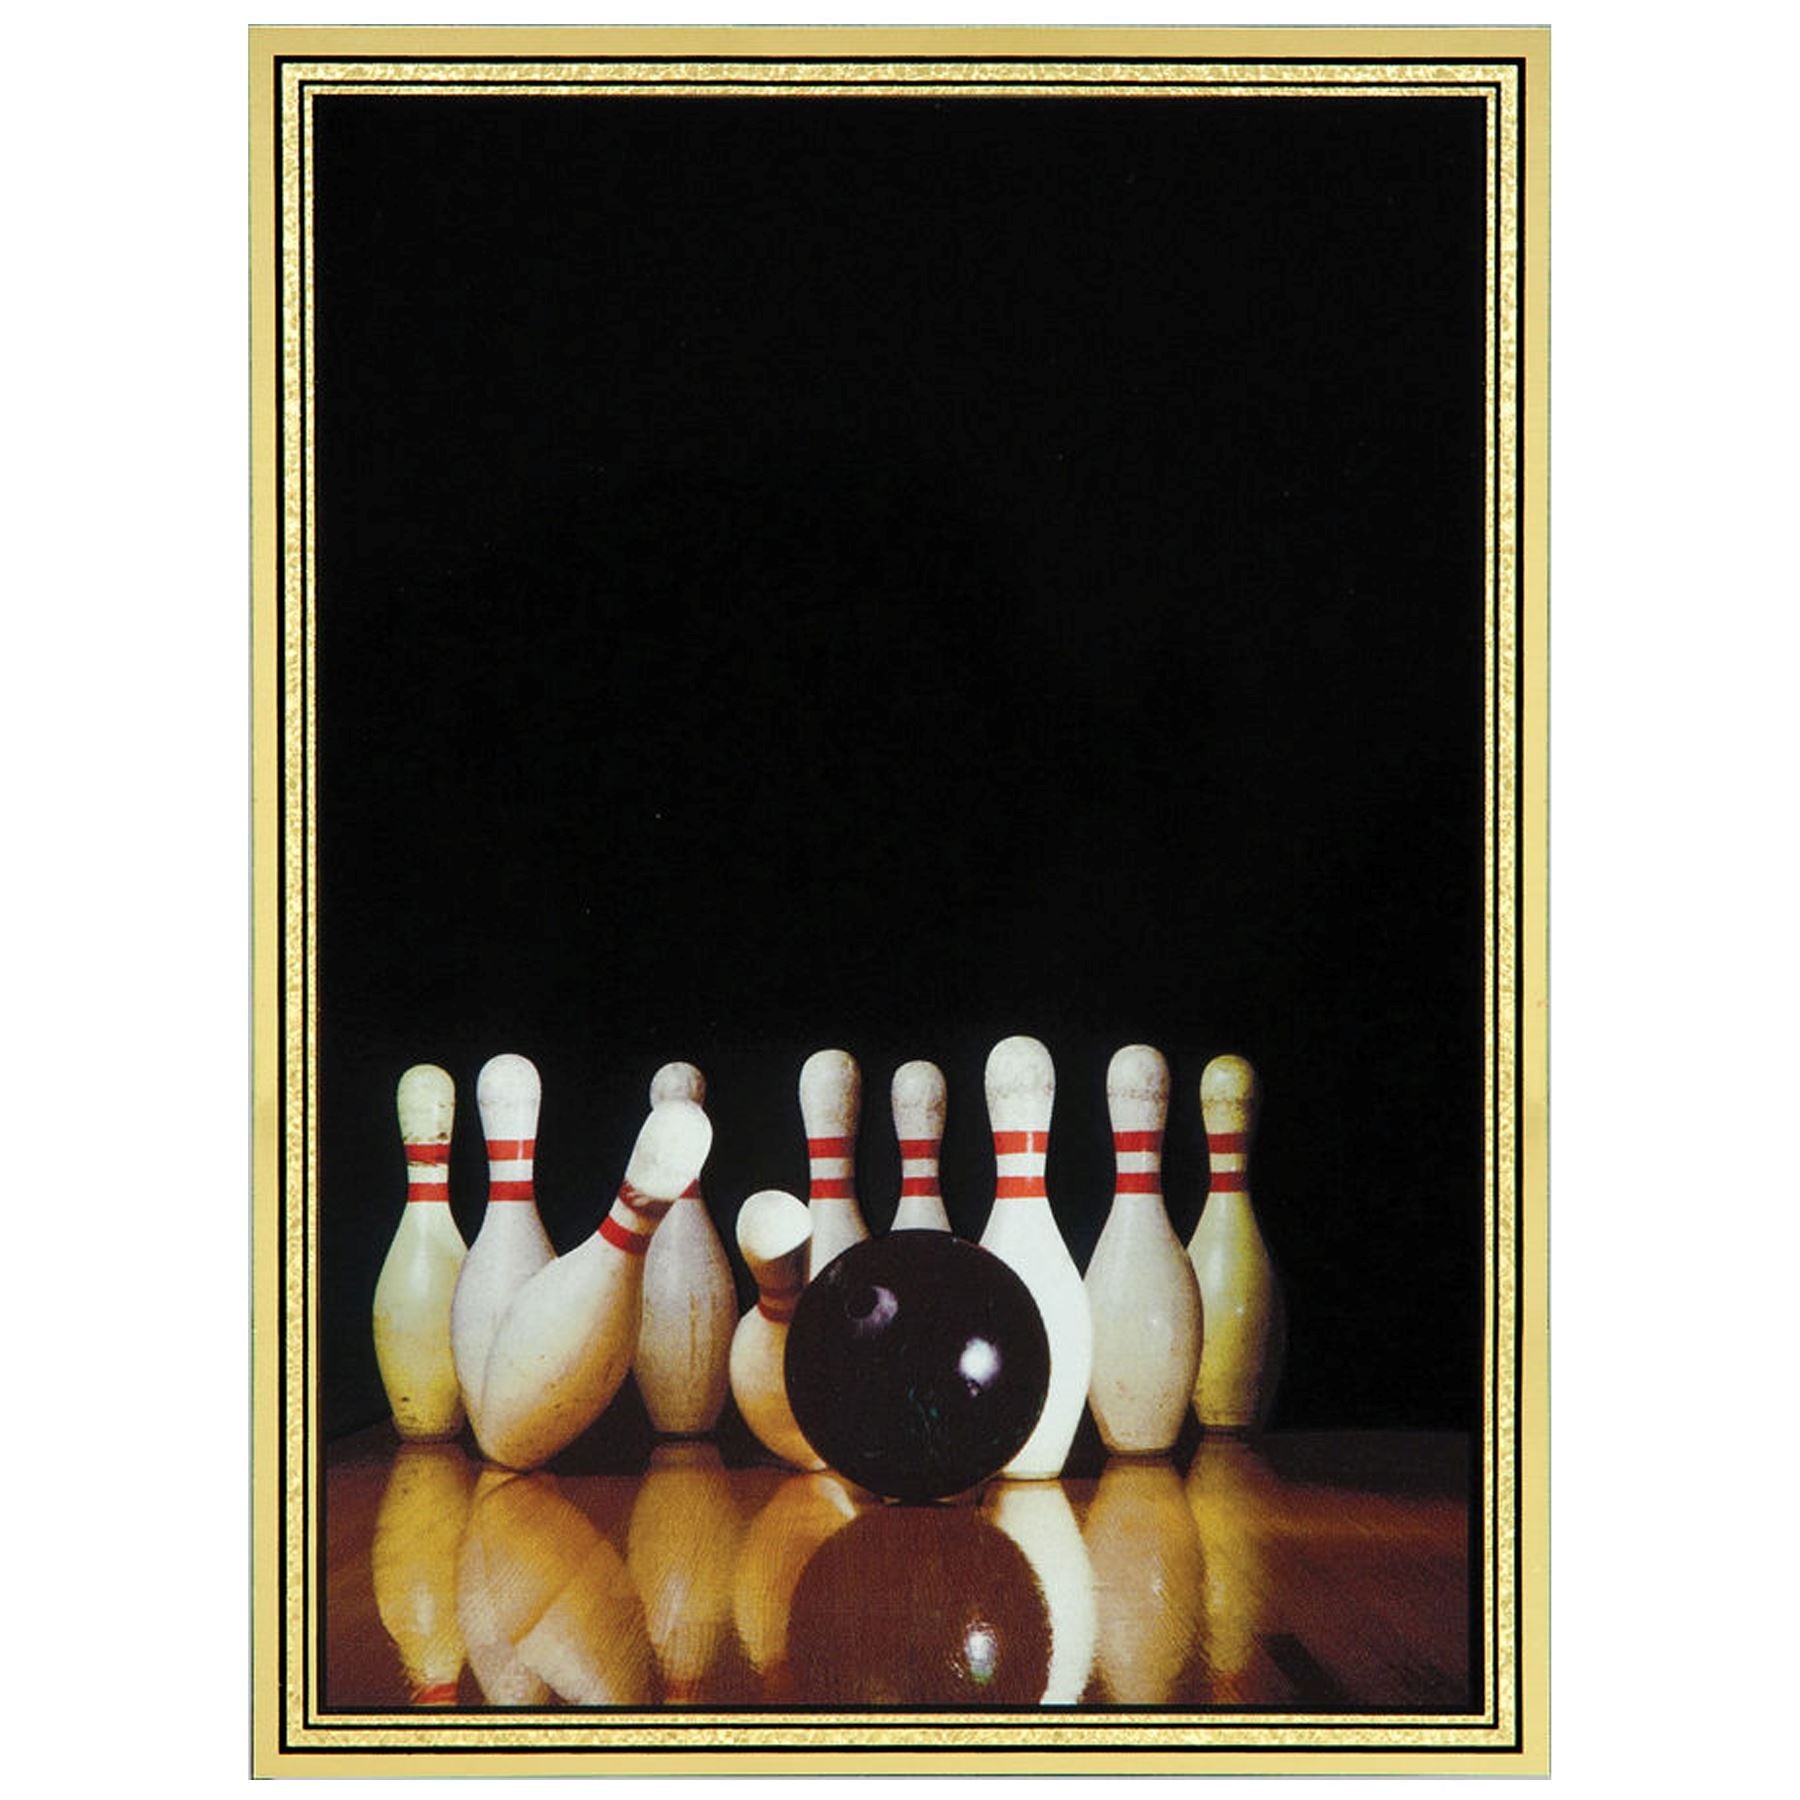 Brass Plated Steel Hi-Def Plaque Plate, Bowling, 3 7/8" x 5 7/8" Plaque Craftworks NW 